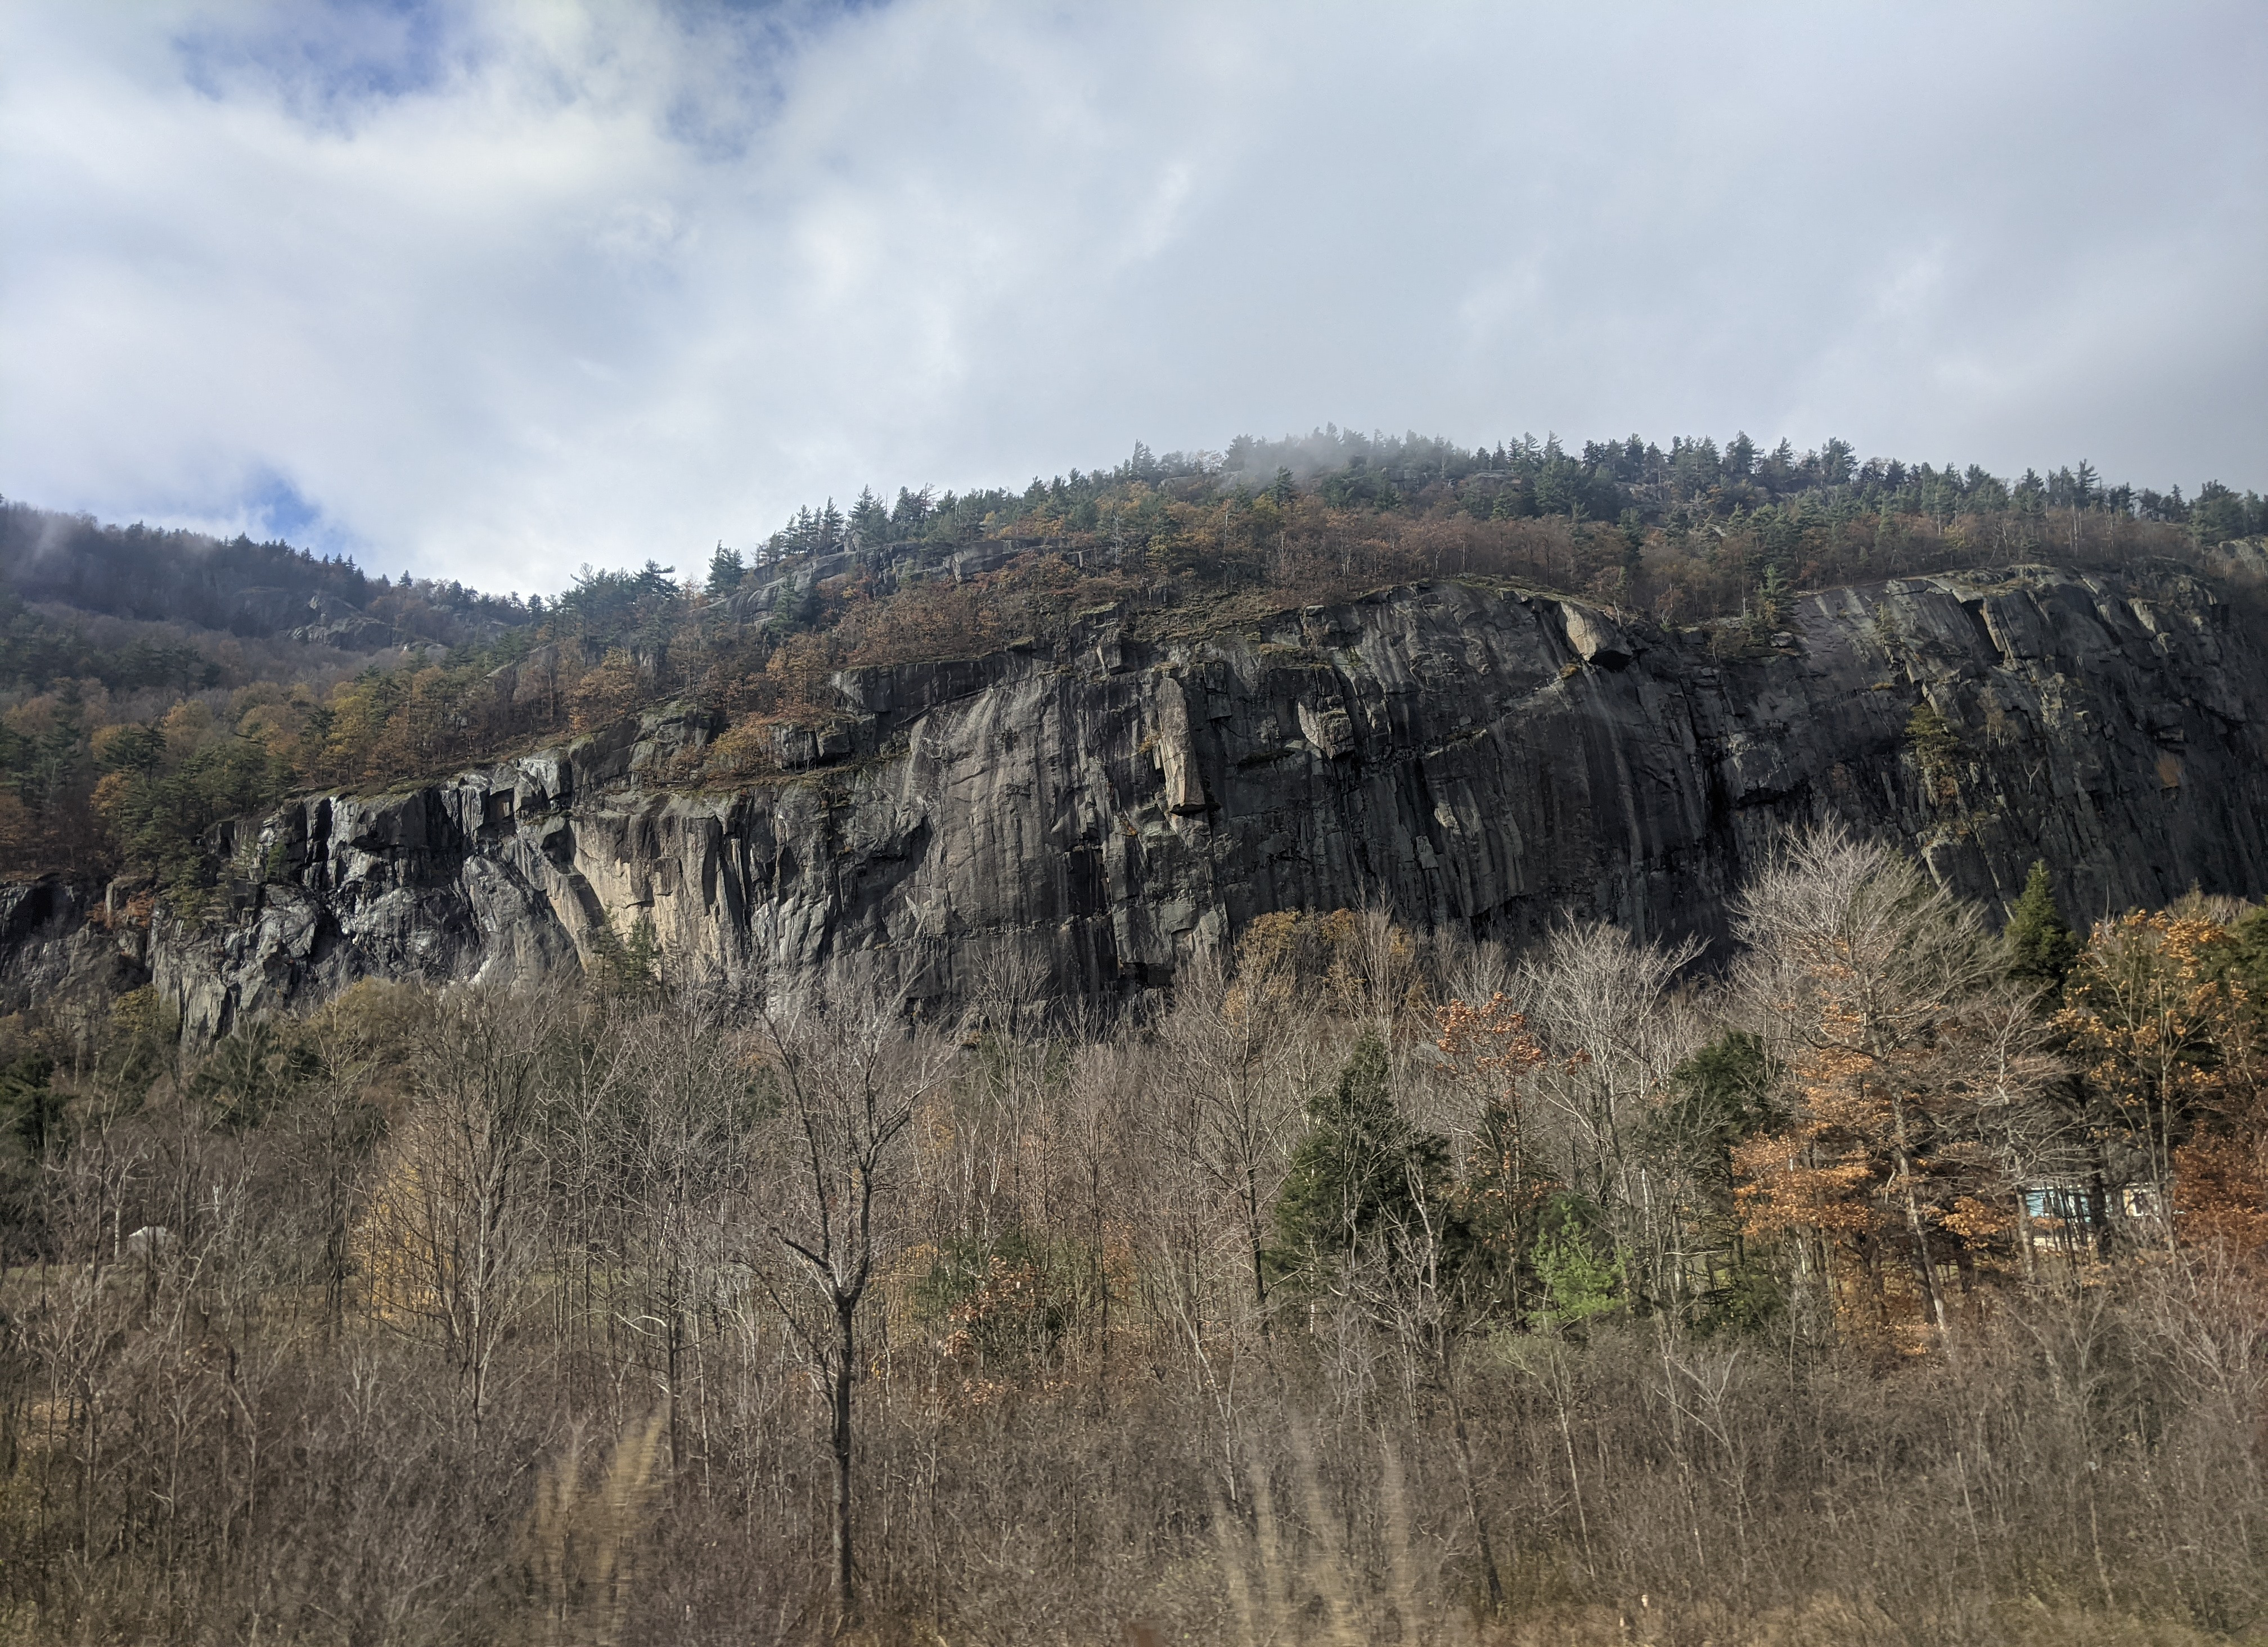 A sheer, rocky cliff face, viewed from a road.